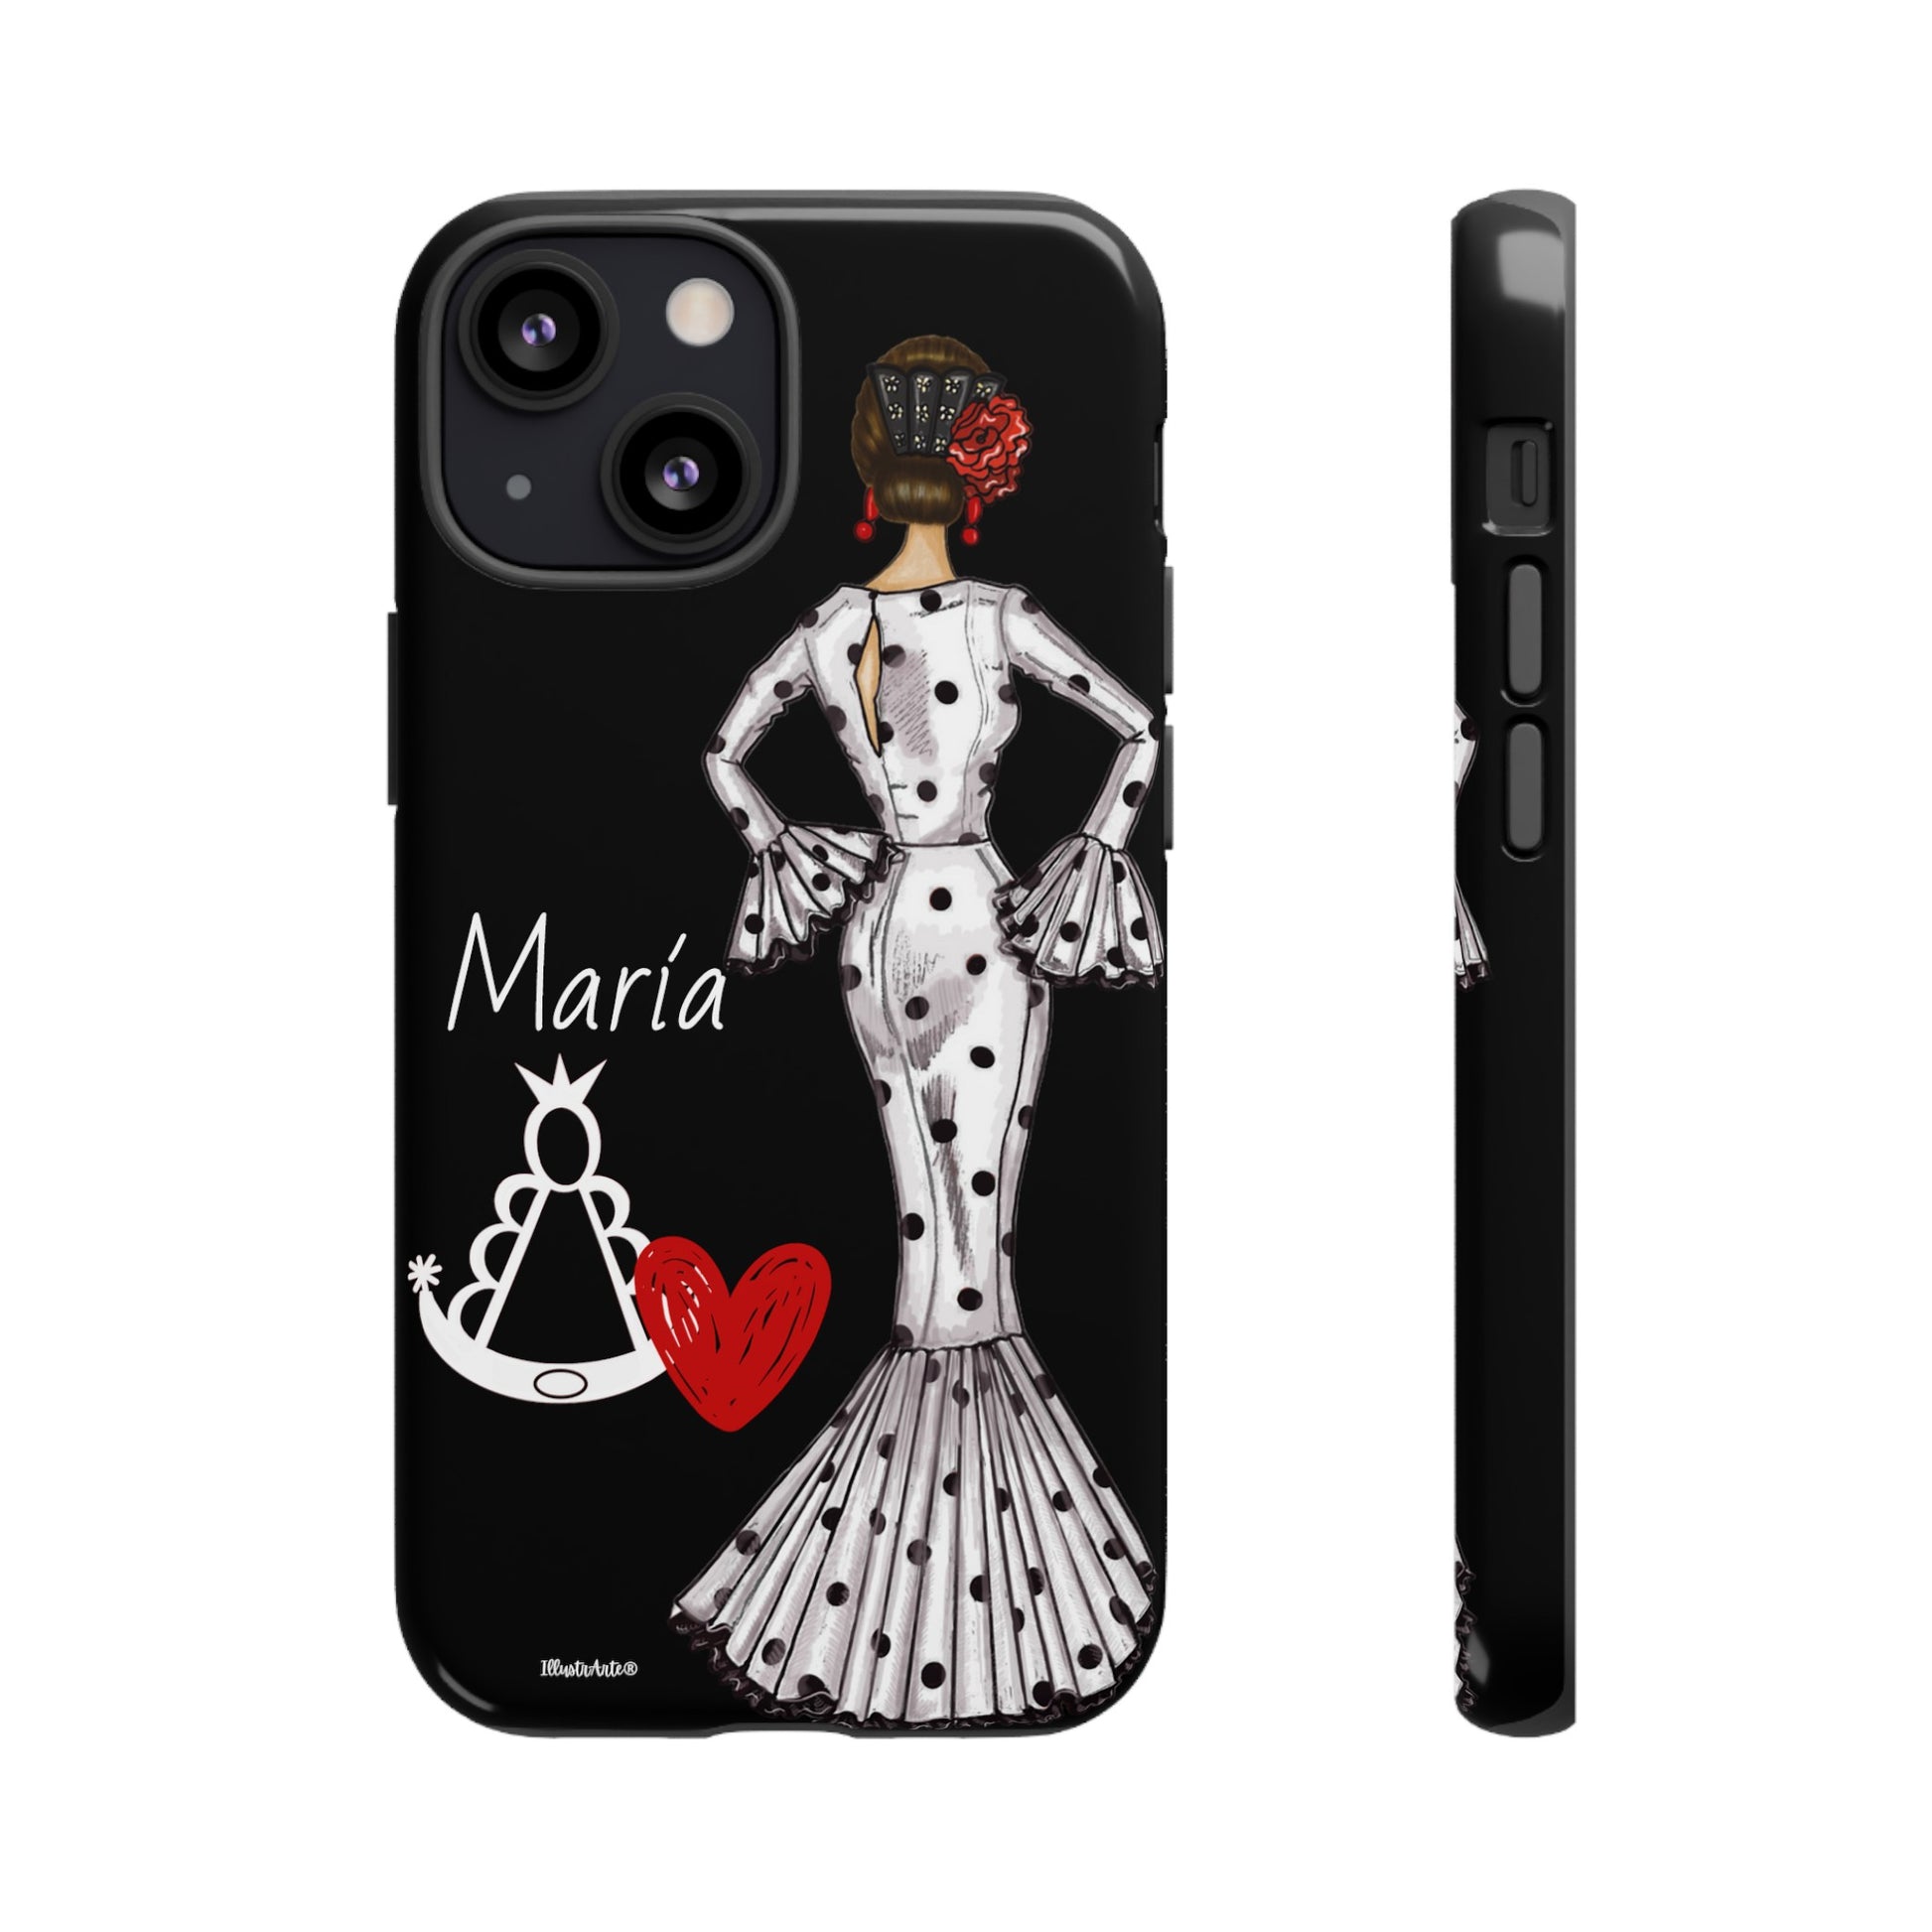 a cell phone case with a woman in a dress